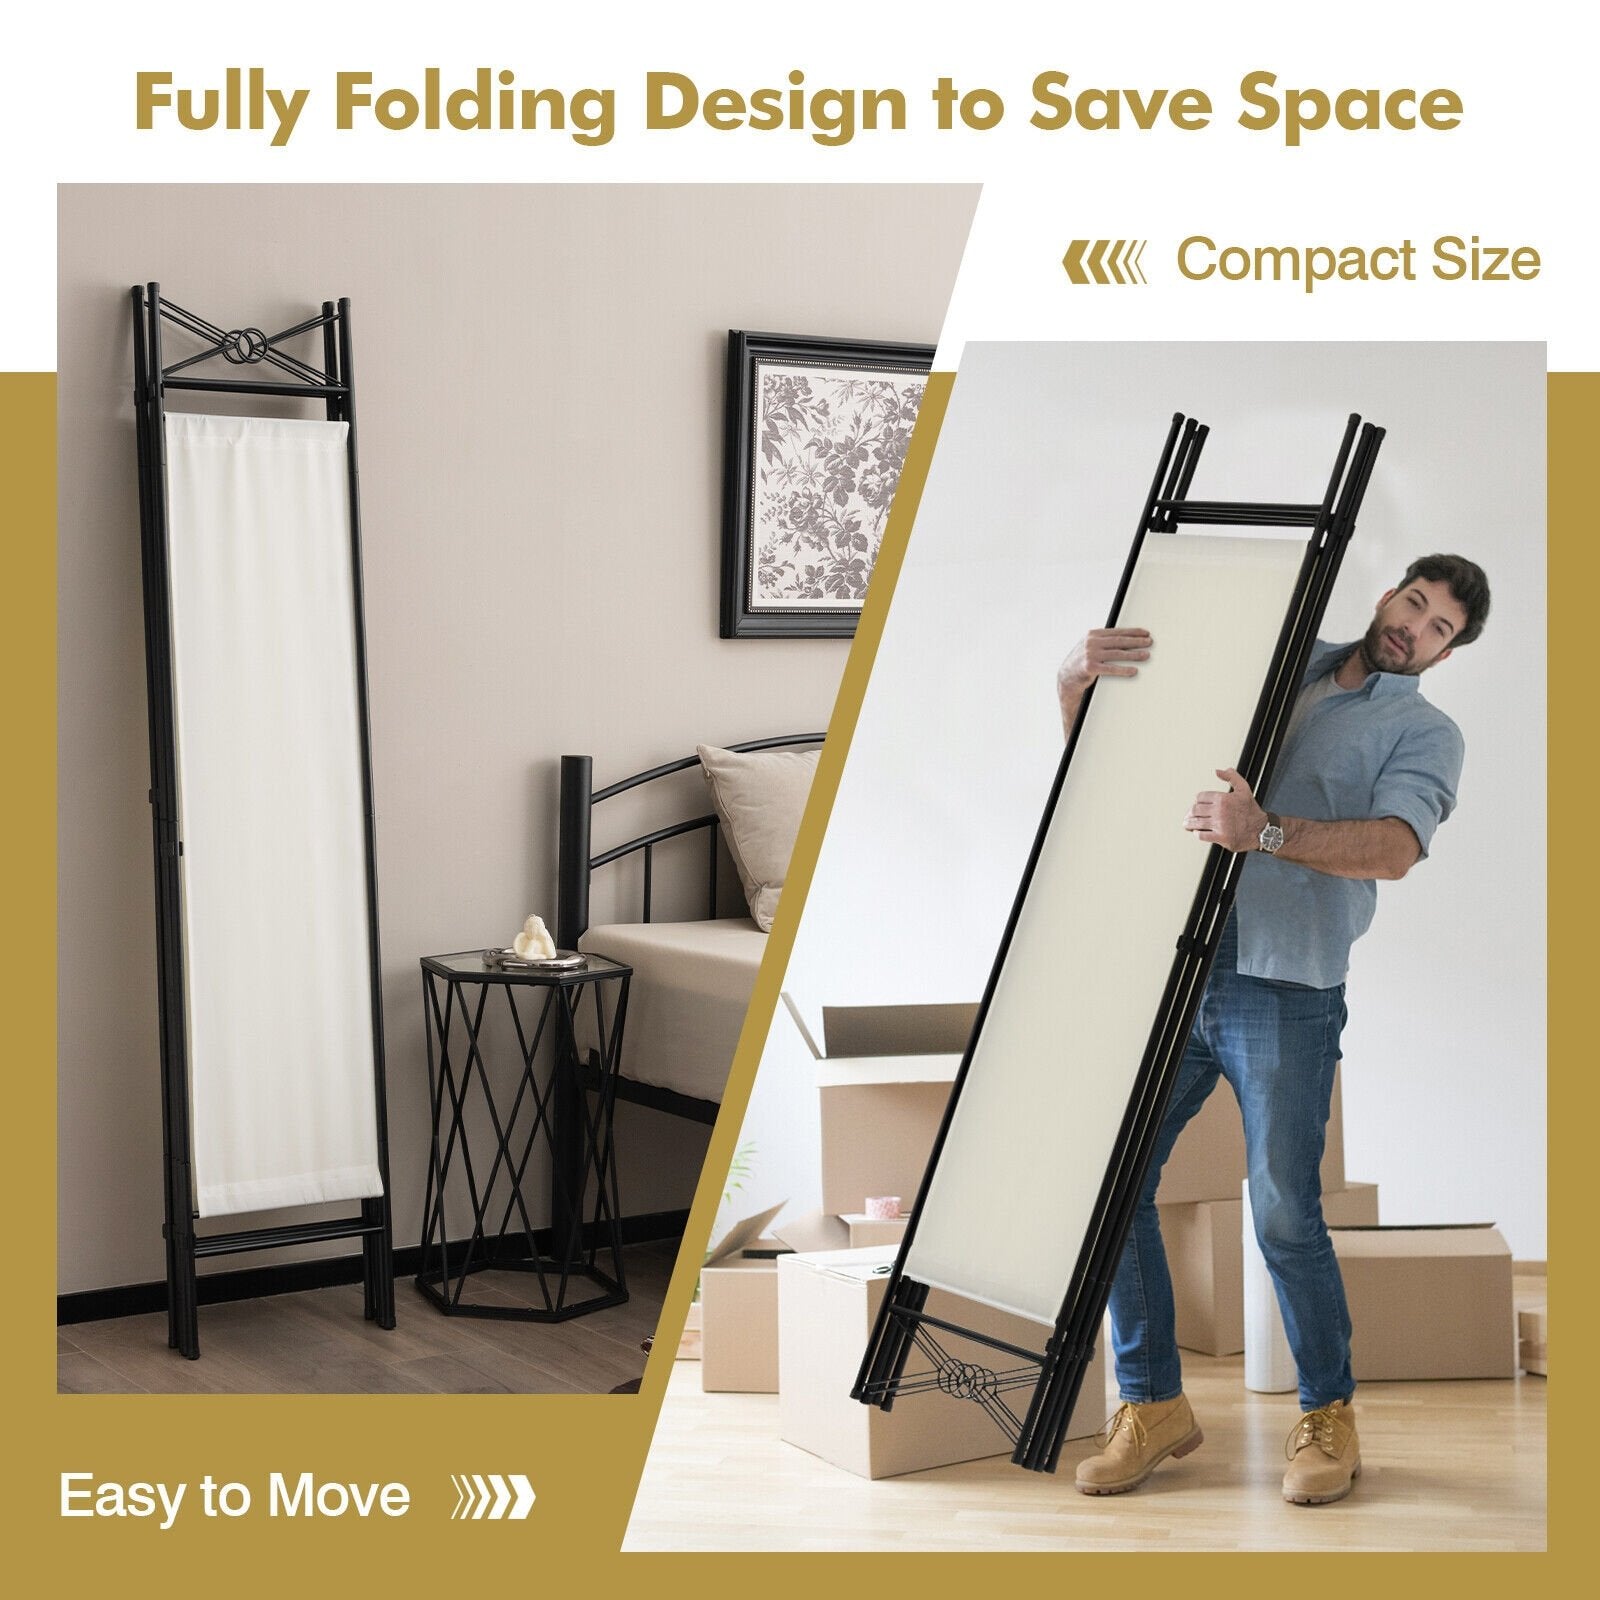 6 Feet 4-Panel Folding Freestanding Room Divider, White Room Dividers   at Gallery Canada